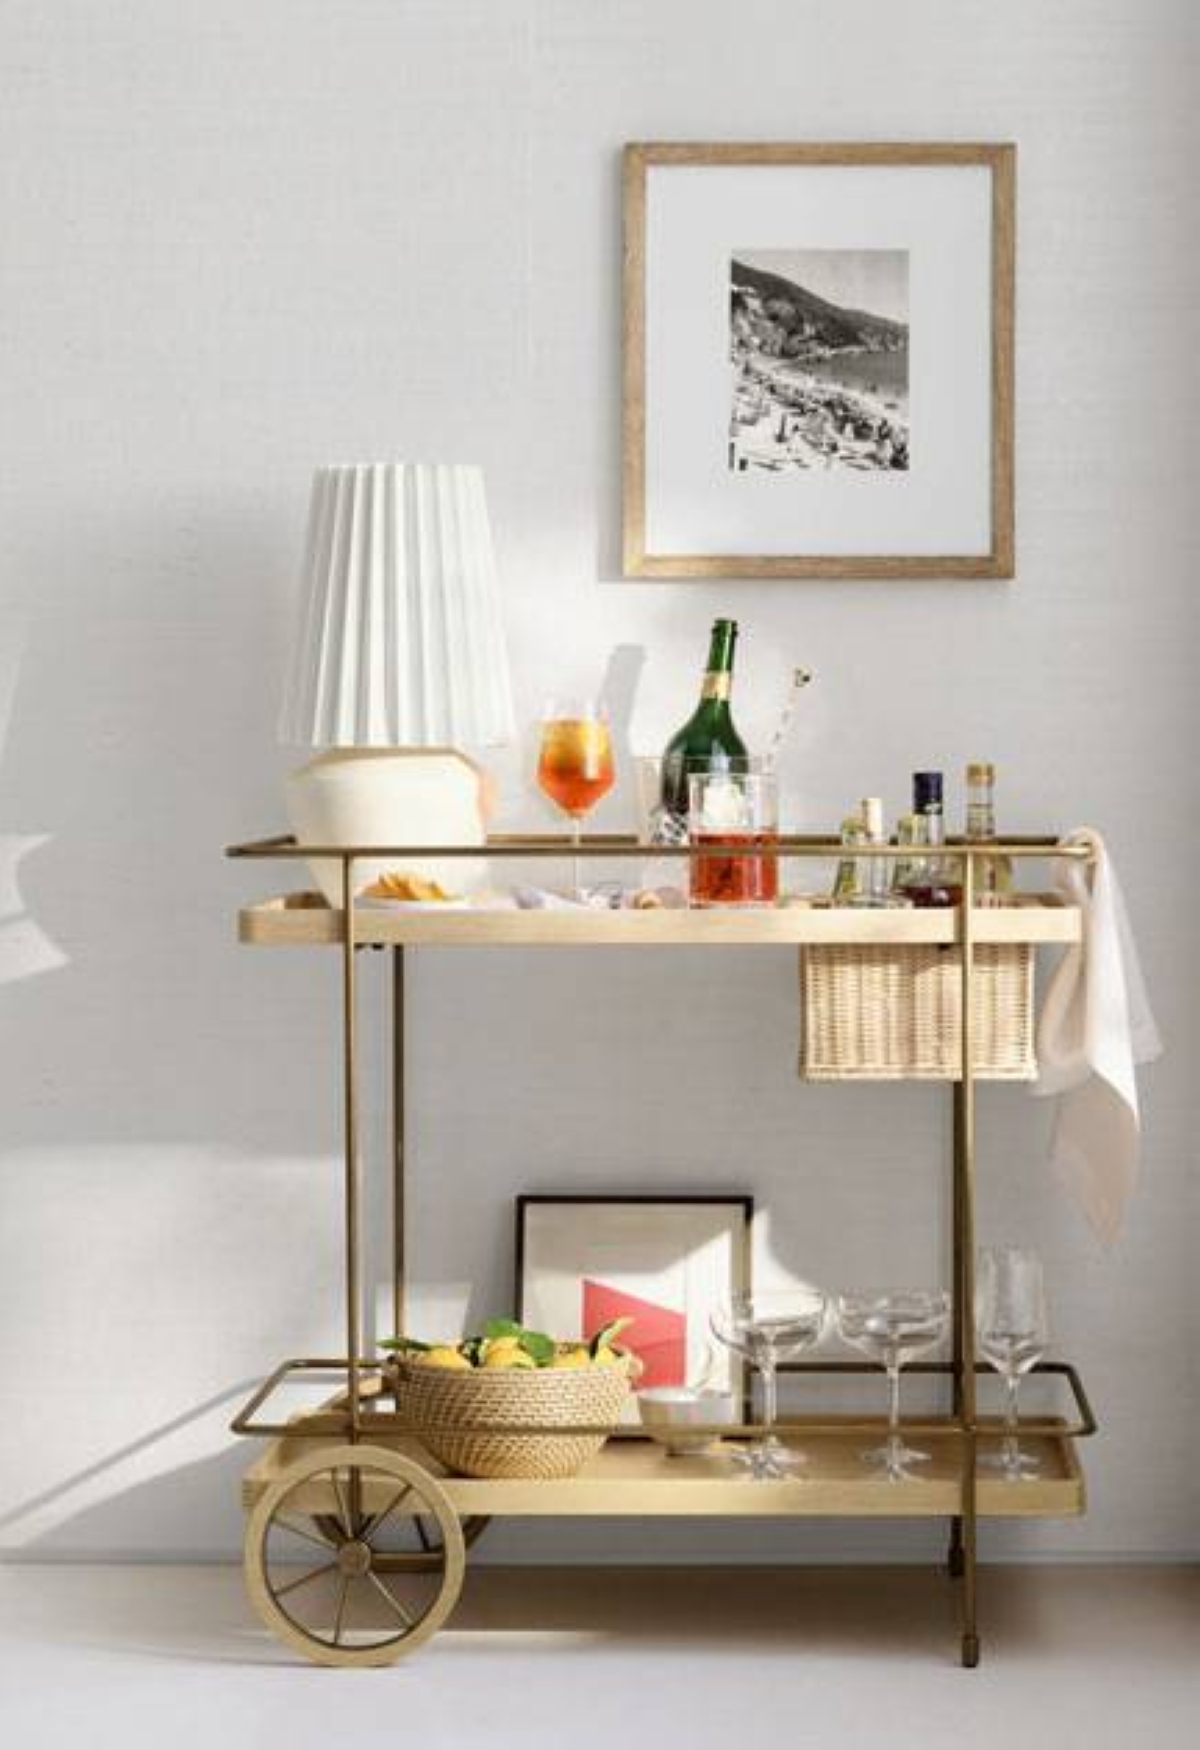 Elevate cocktail hour with this luxurious bar cart inspired by 1940s French design.